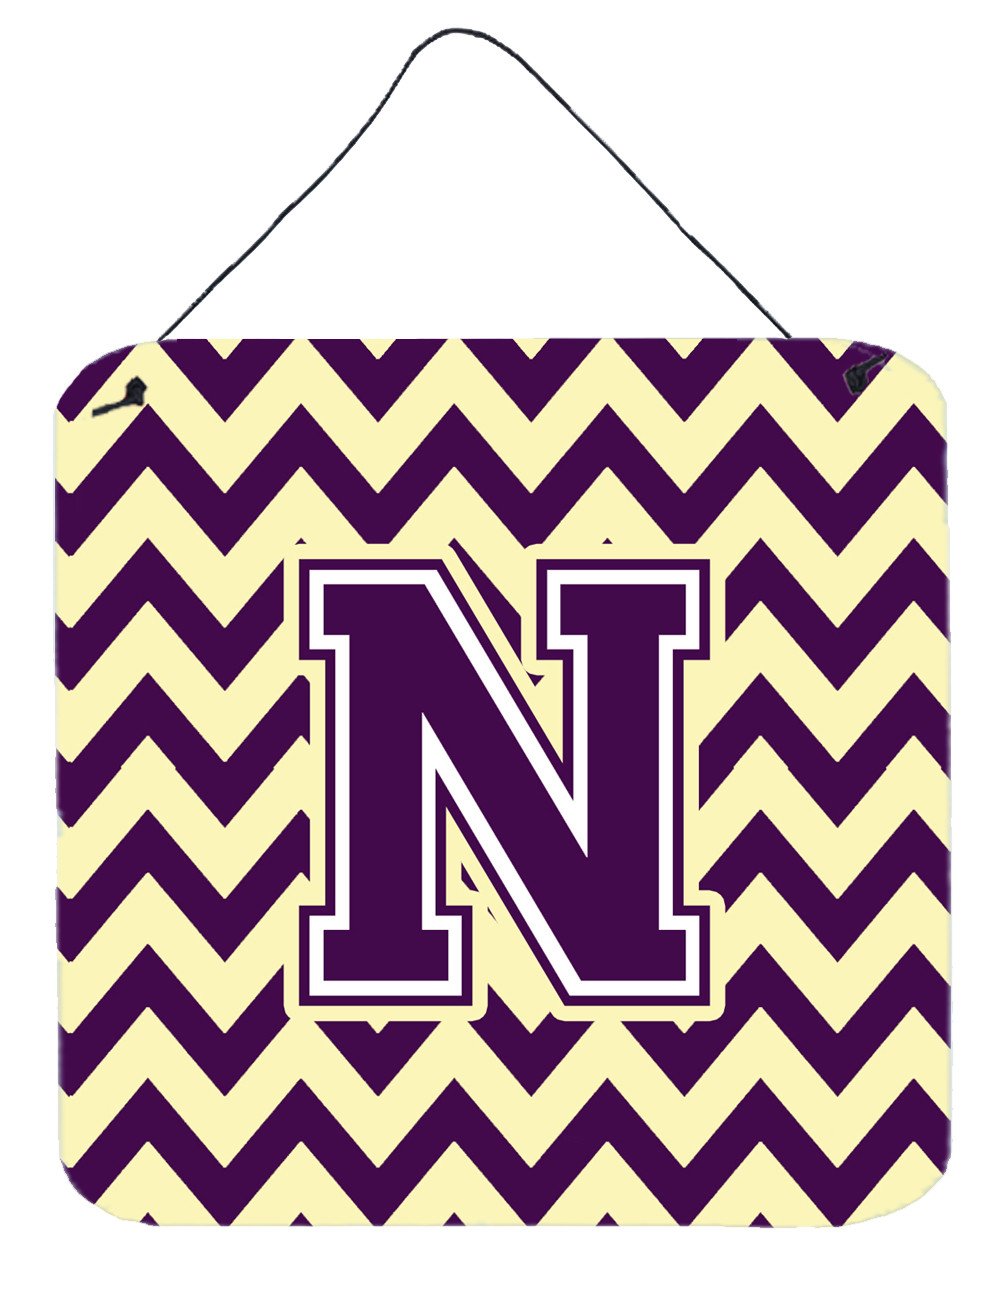 Letter N Chevron Purple and Gold Wall or Door Hanging Prints CJ1058-NDS66 by Caroline's Treasures